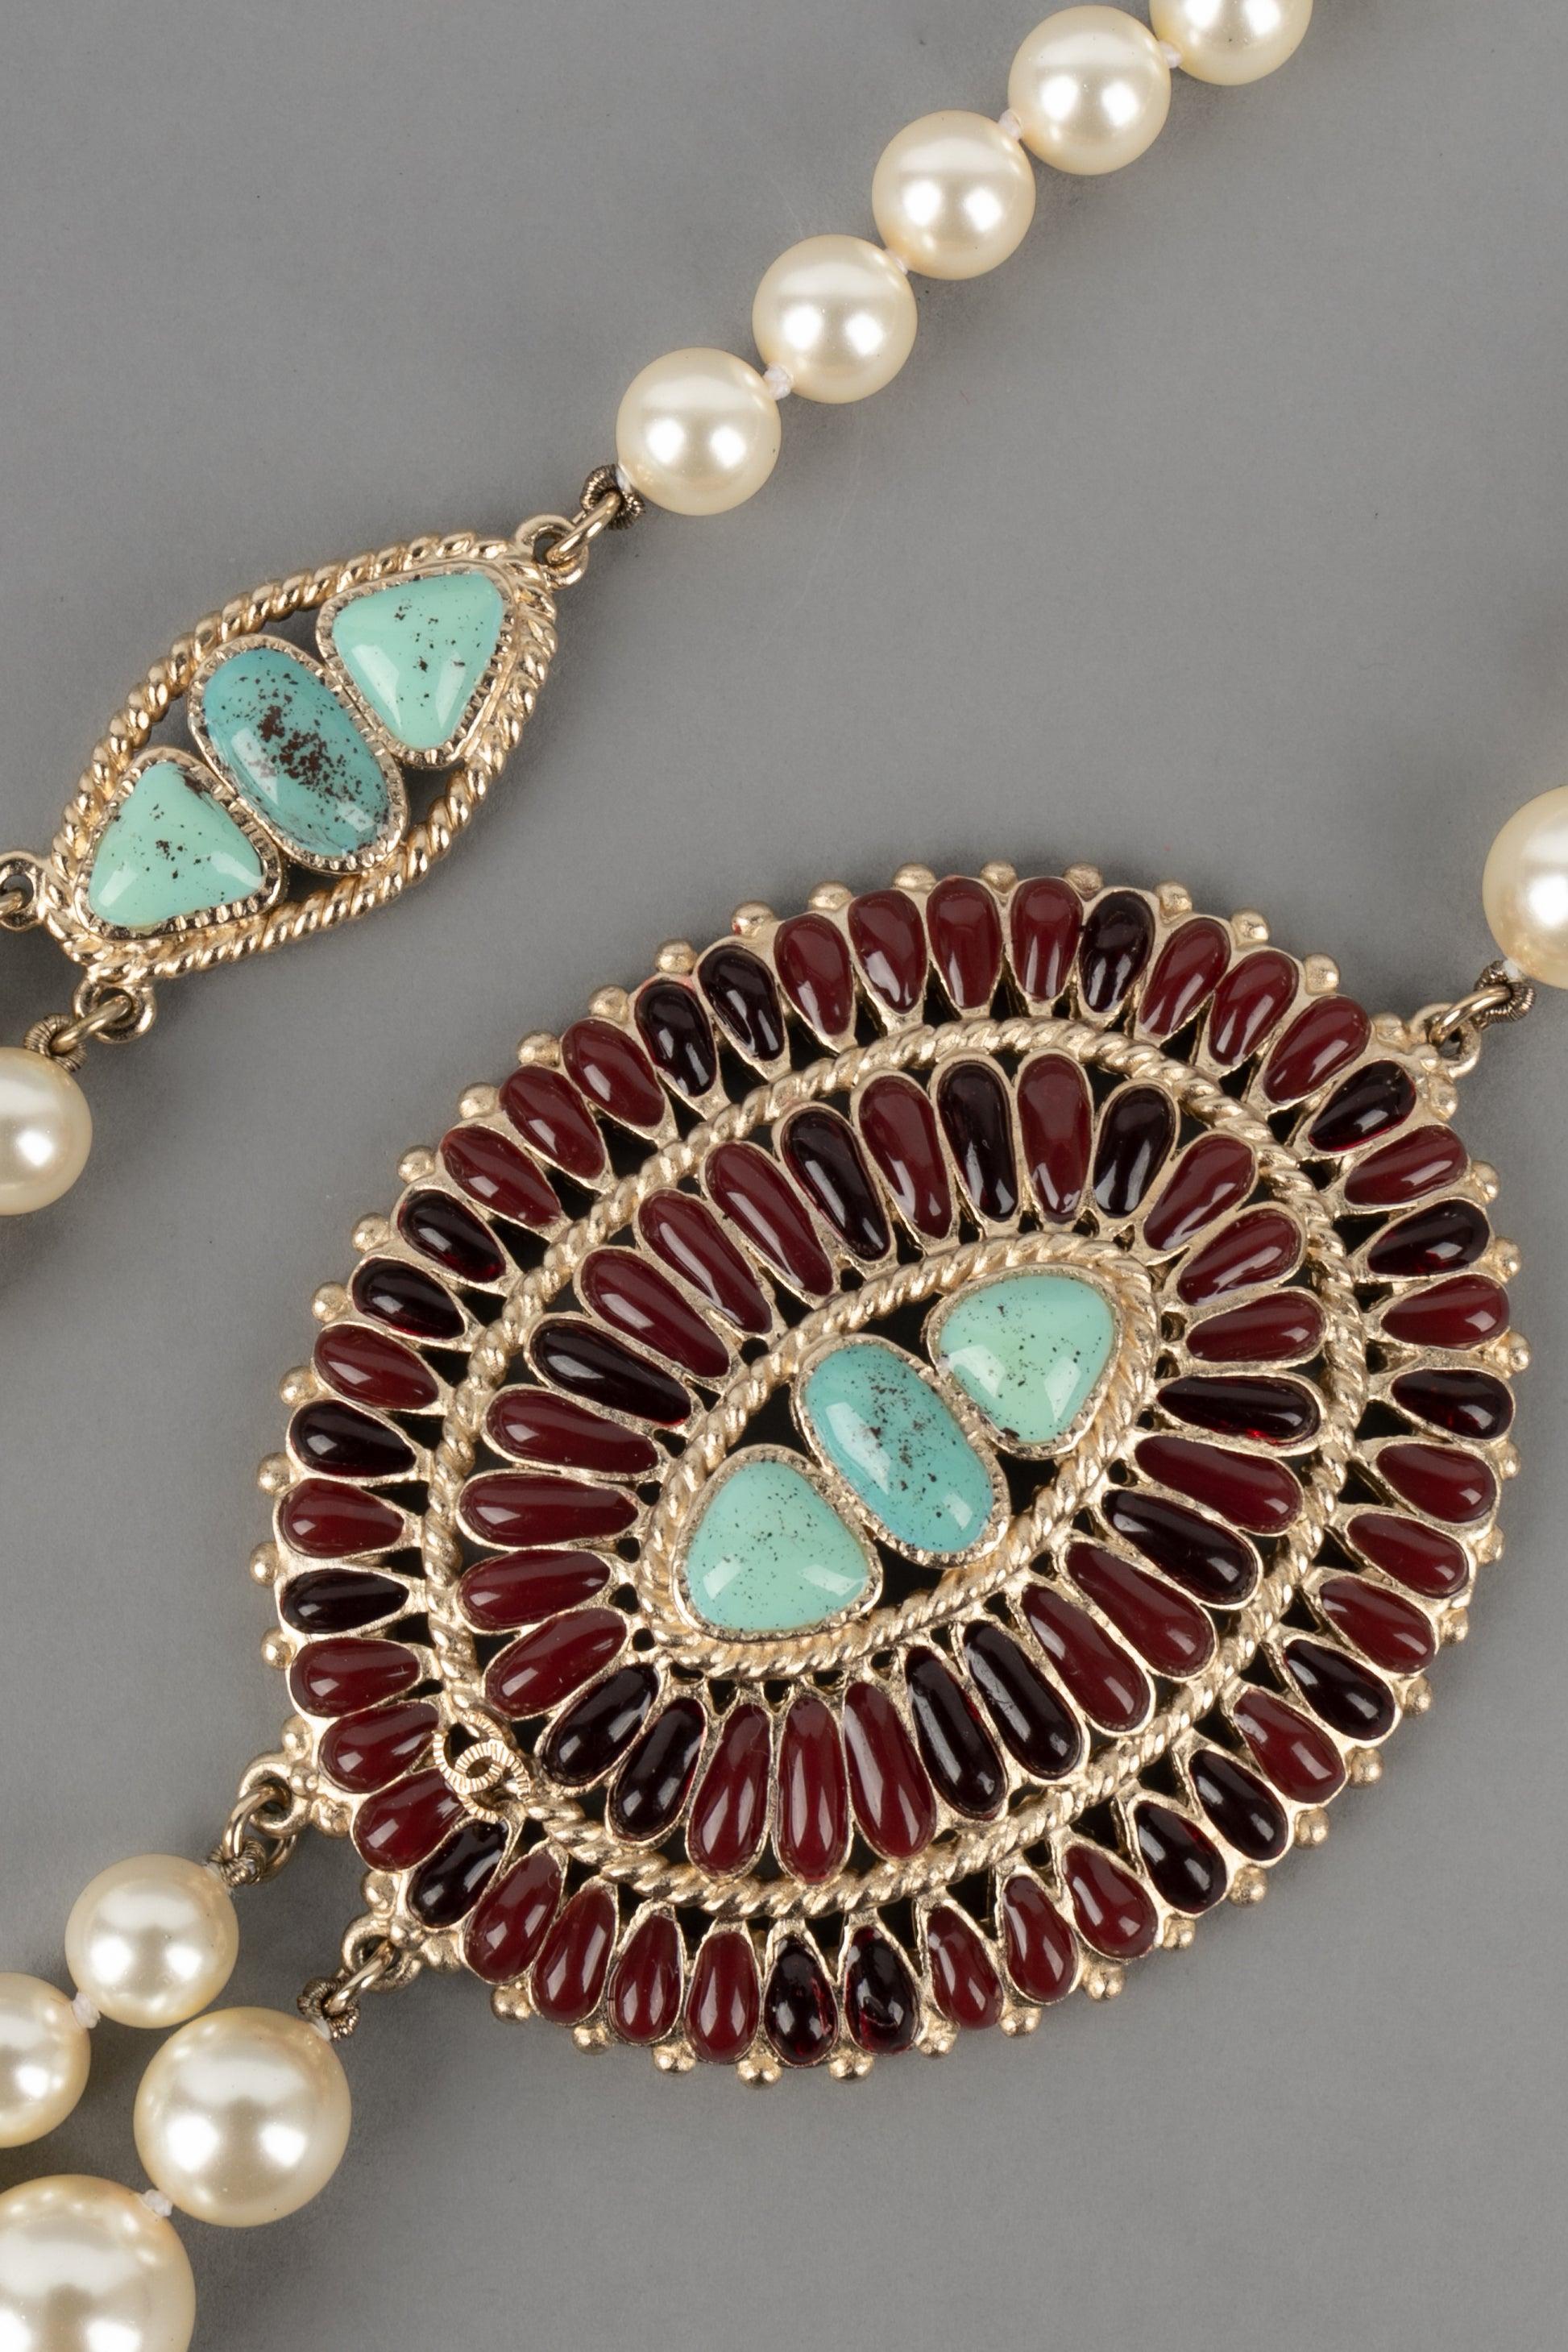 Chanel - (Made in France) Long necklace with costume pearls and blue and burgundy resin medallions. 2014 Collection.

Additional Information:
Condition: Very good condition
Dimensions: Length of te shorter row: from 94 cm to 97 cm
Period: 21st